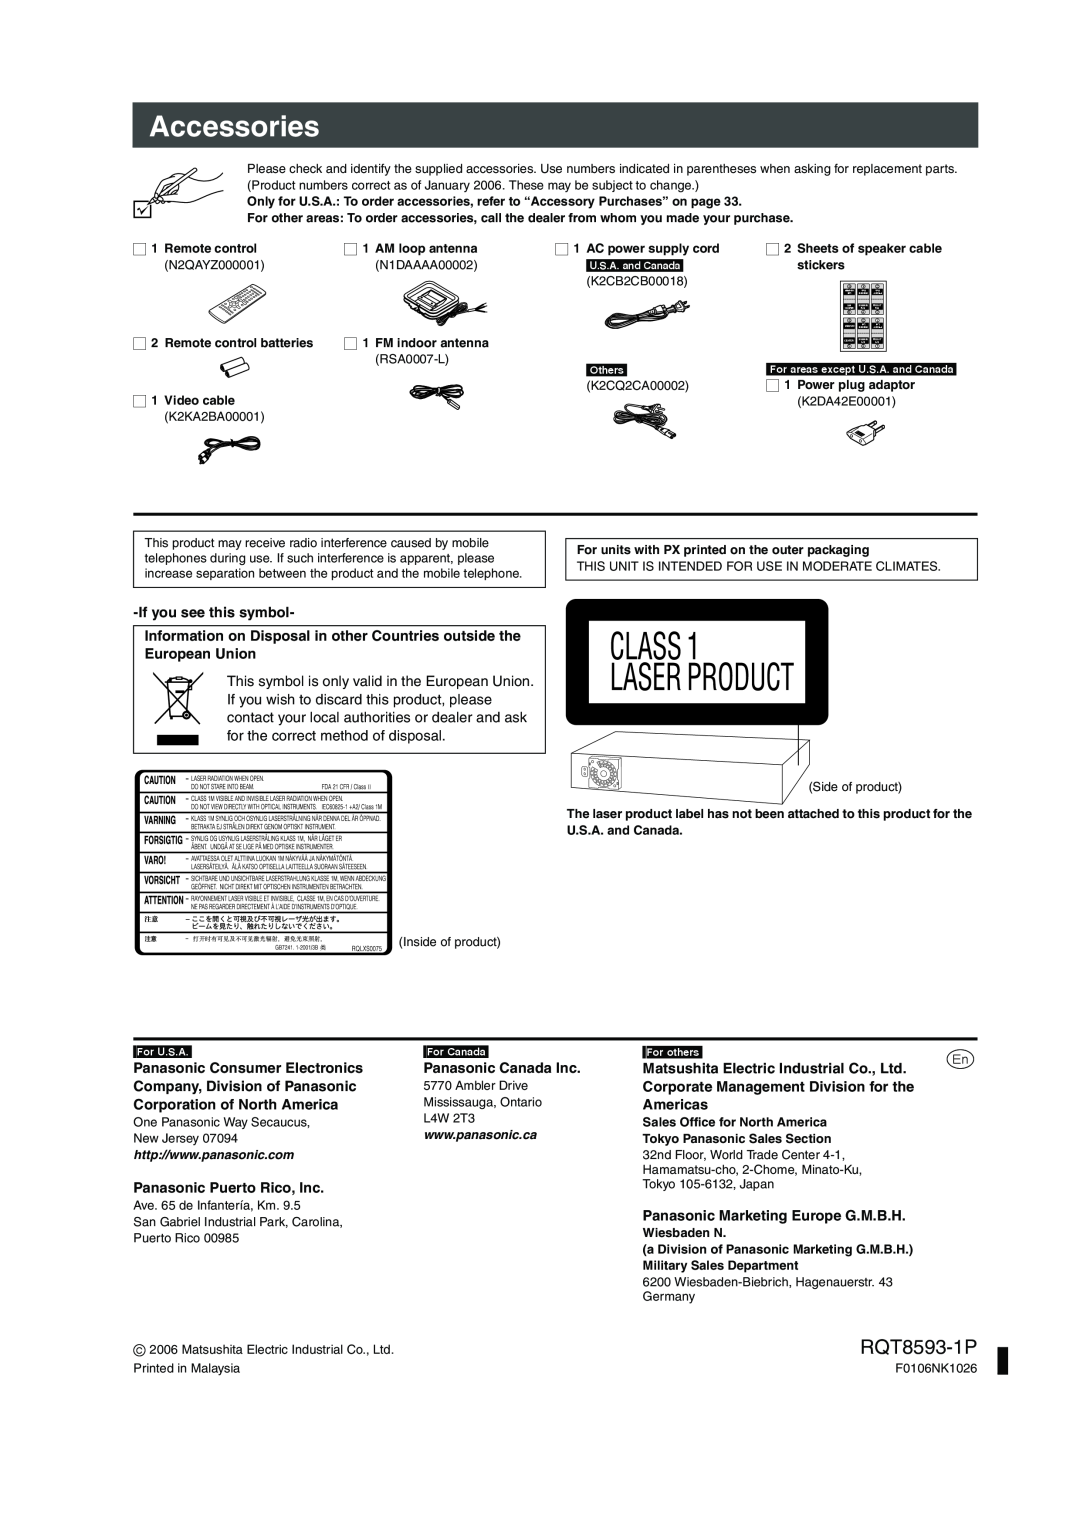 Panasonic SC-HT440 Accessories, HT440En.bookPage36Tuesday,January24,200610 55AM, Ifyou see this symbol, European Union 